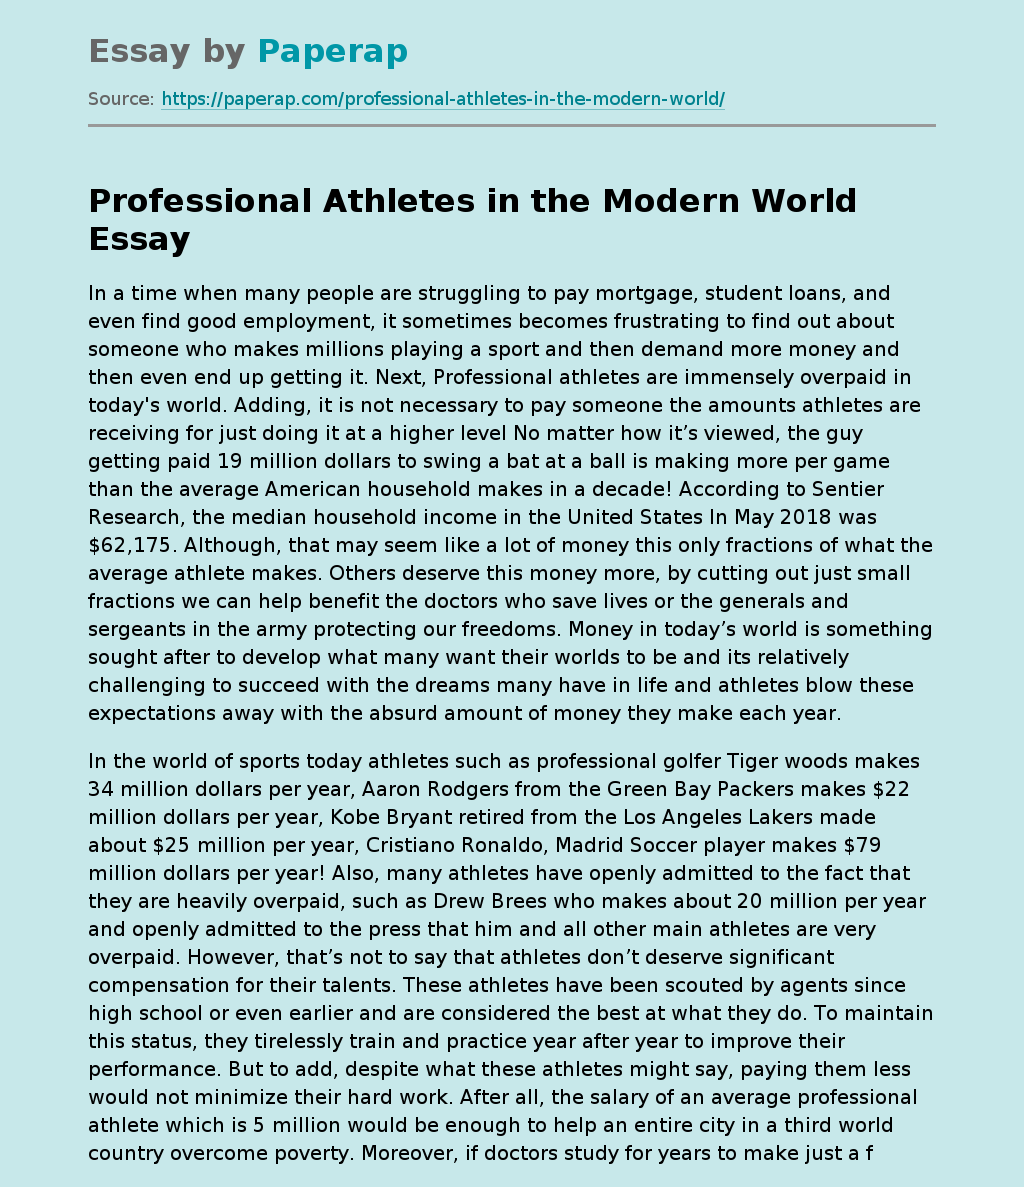 Professional Athletes in the Modern World